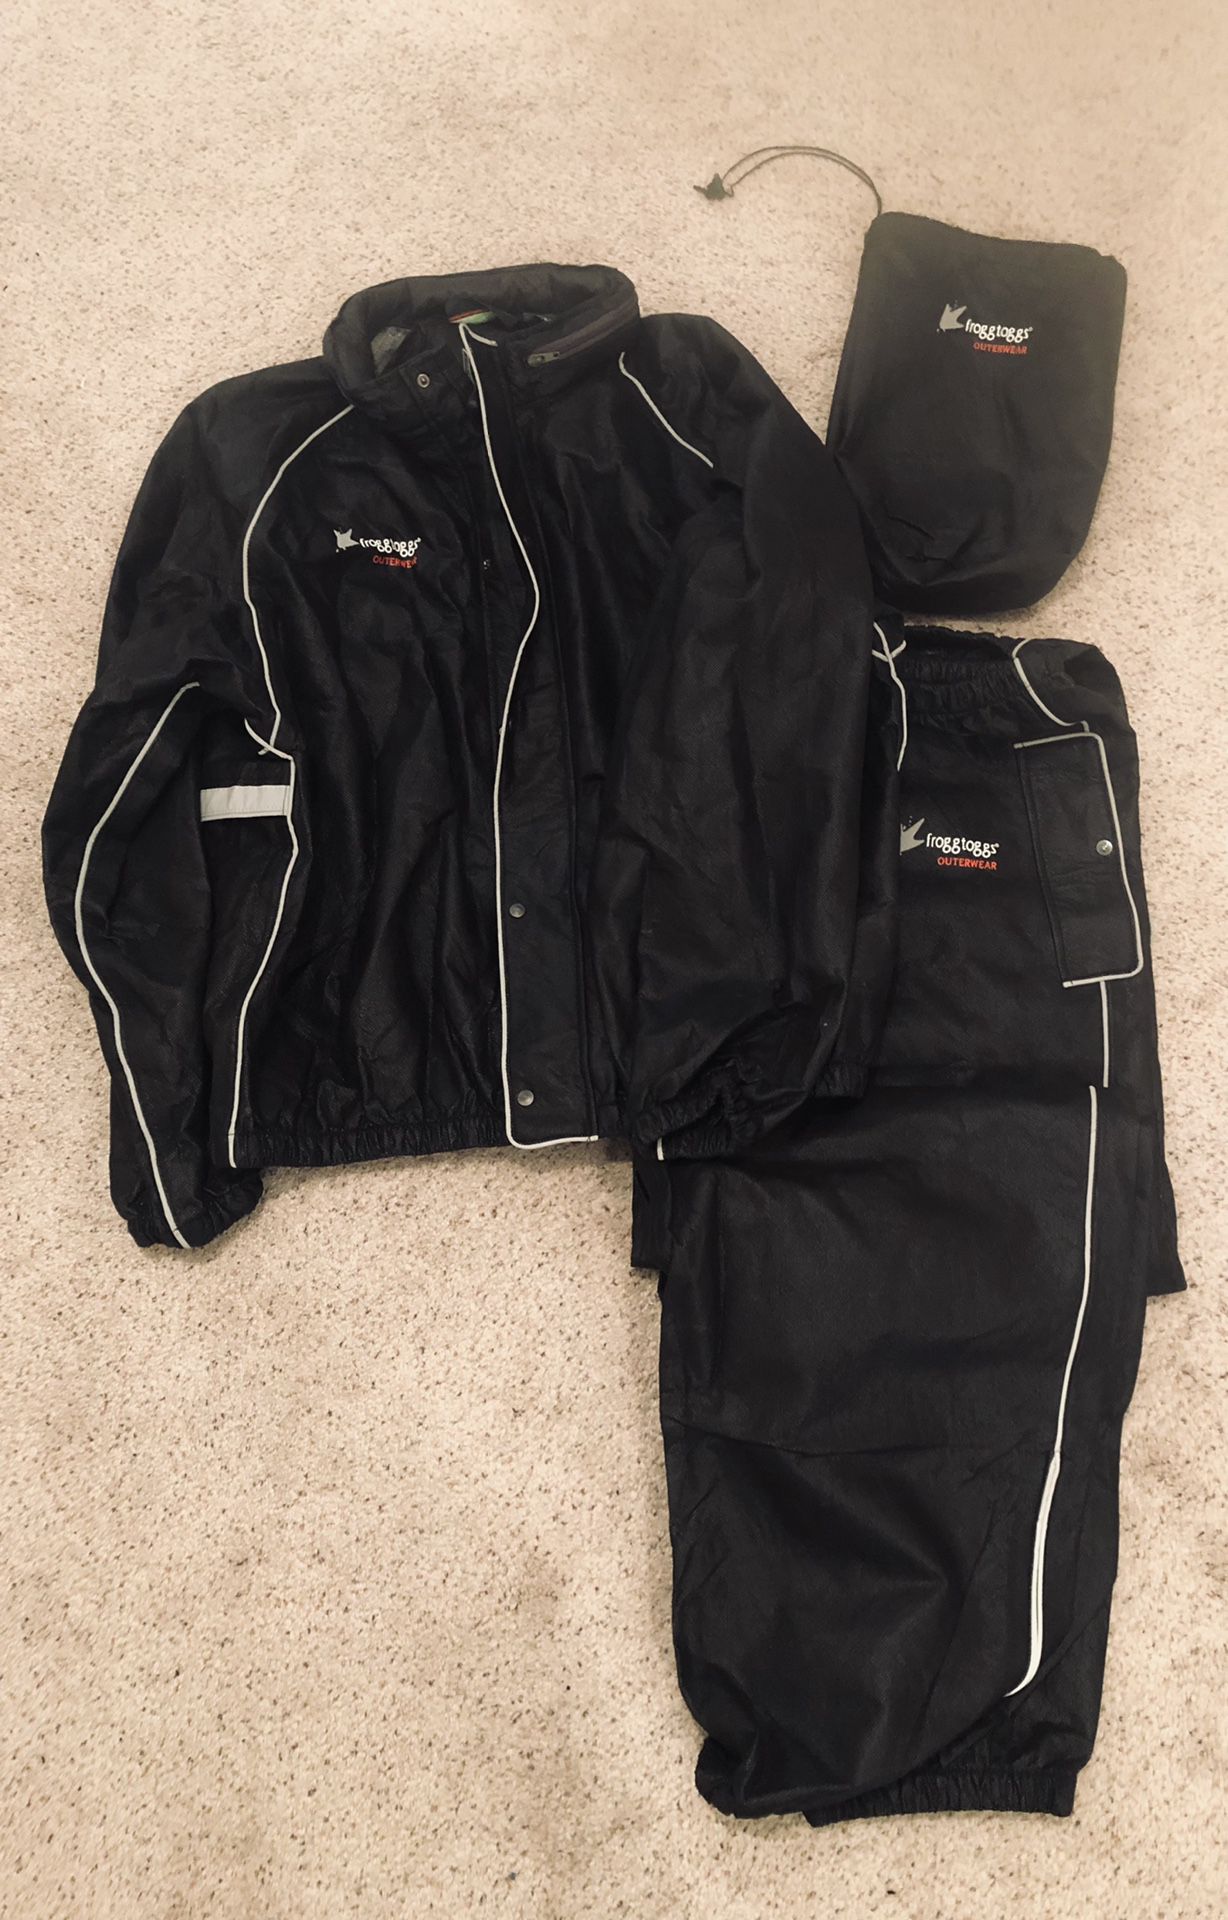 XXL Frogg Toggs Outerwear - Jacket, Pants & Pouch